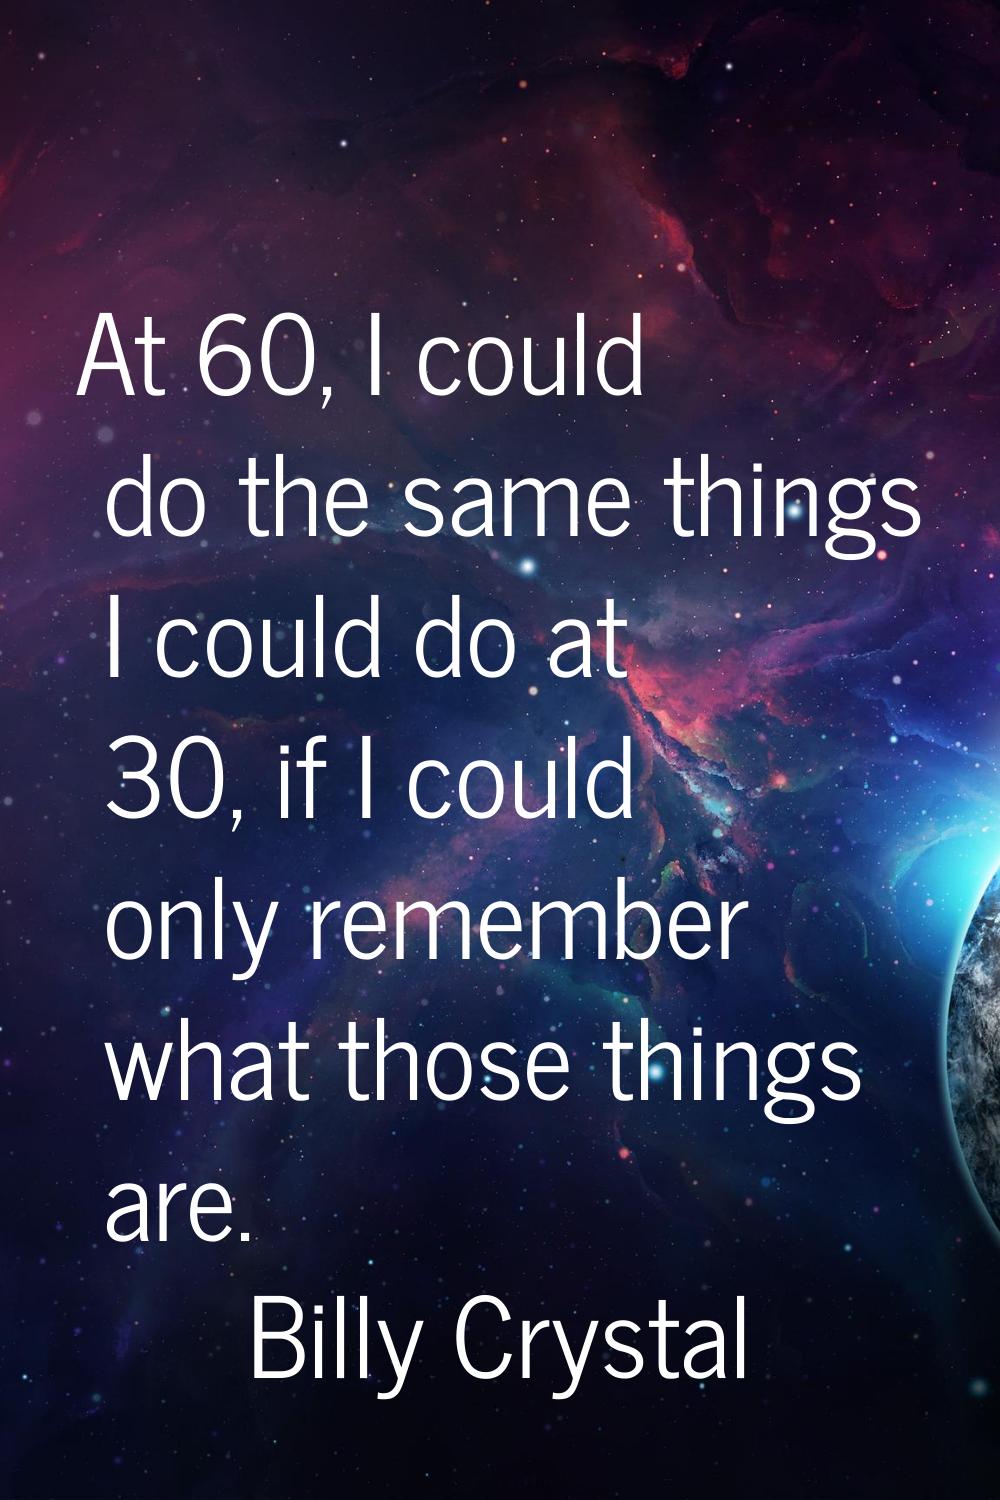 At 60, I could do the same things I could do at 30, if I could only remember what those things are.